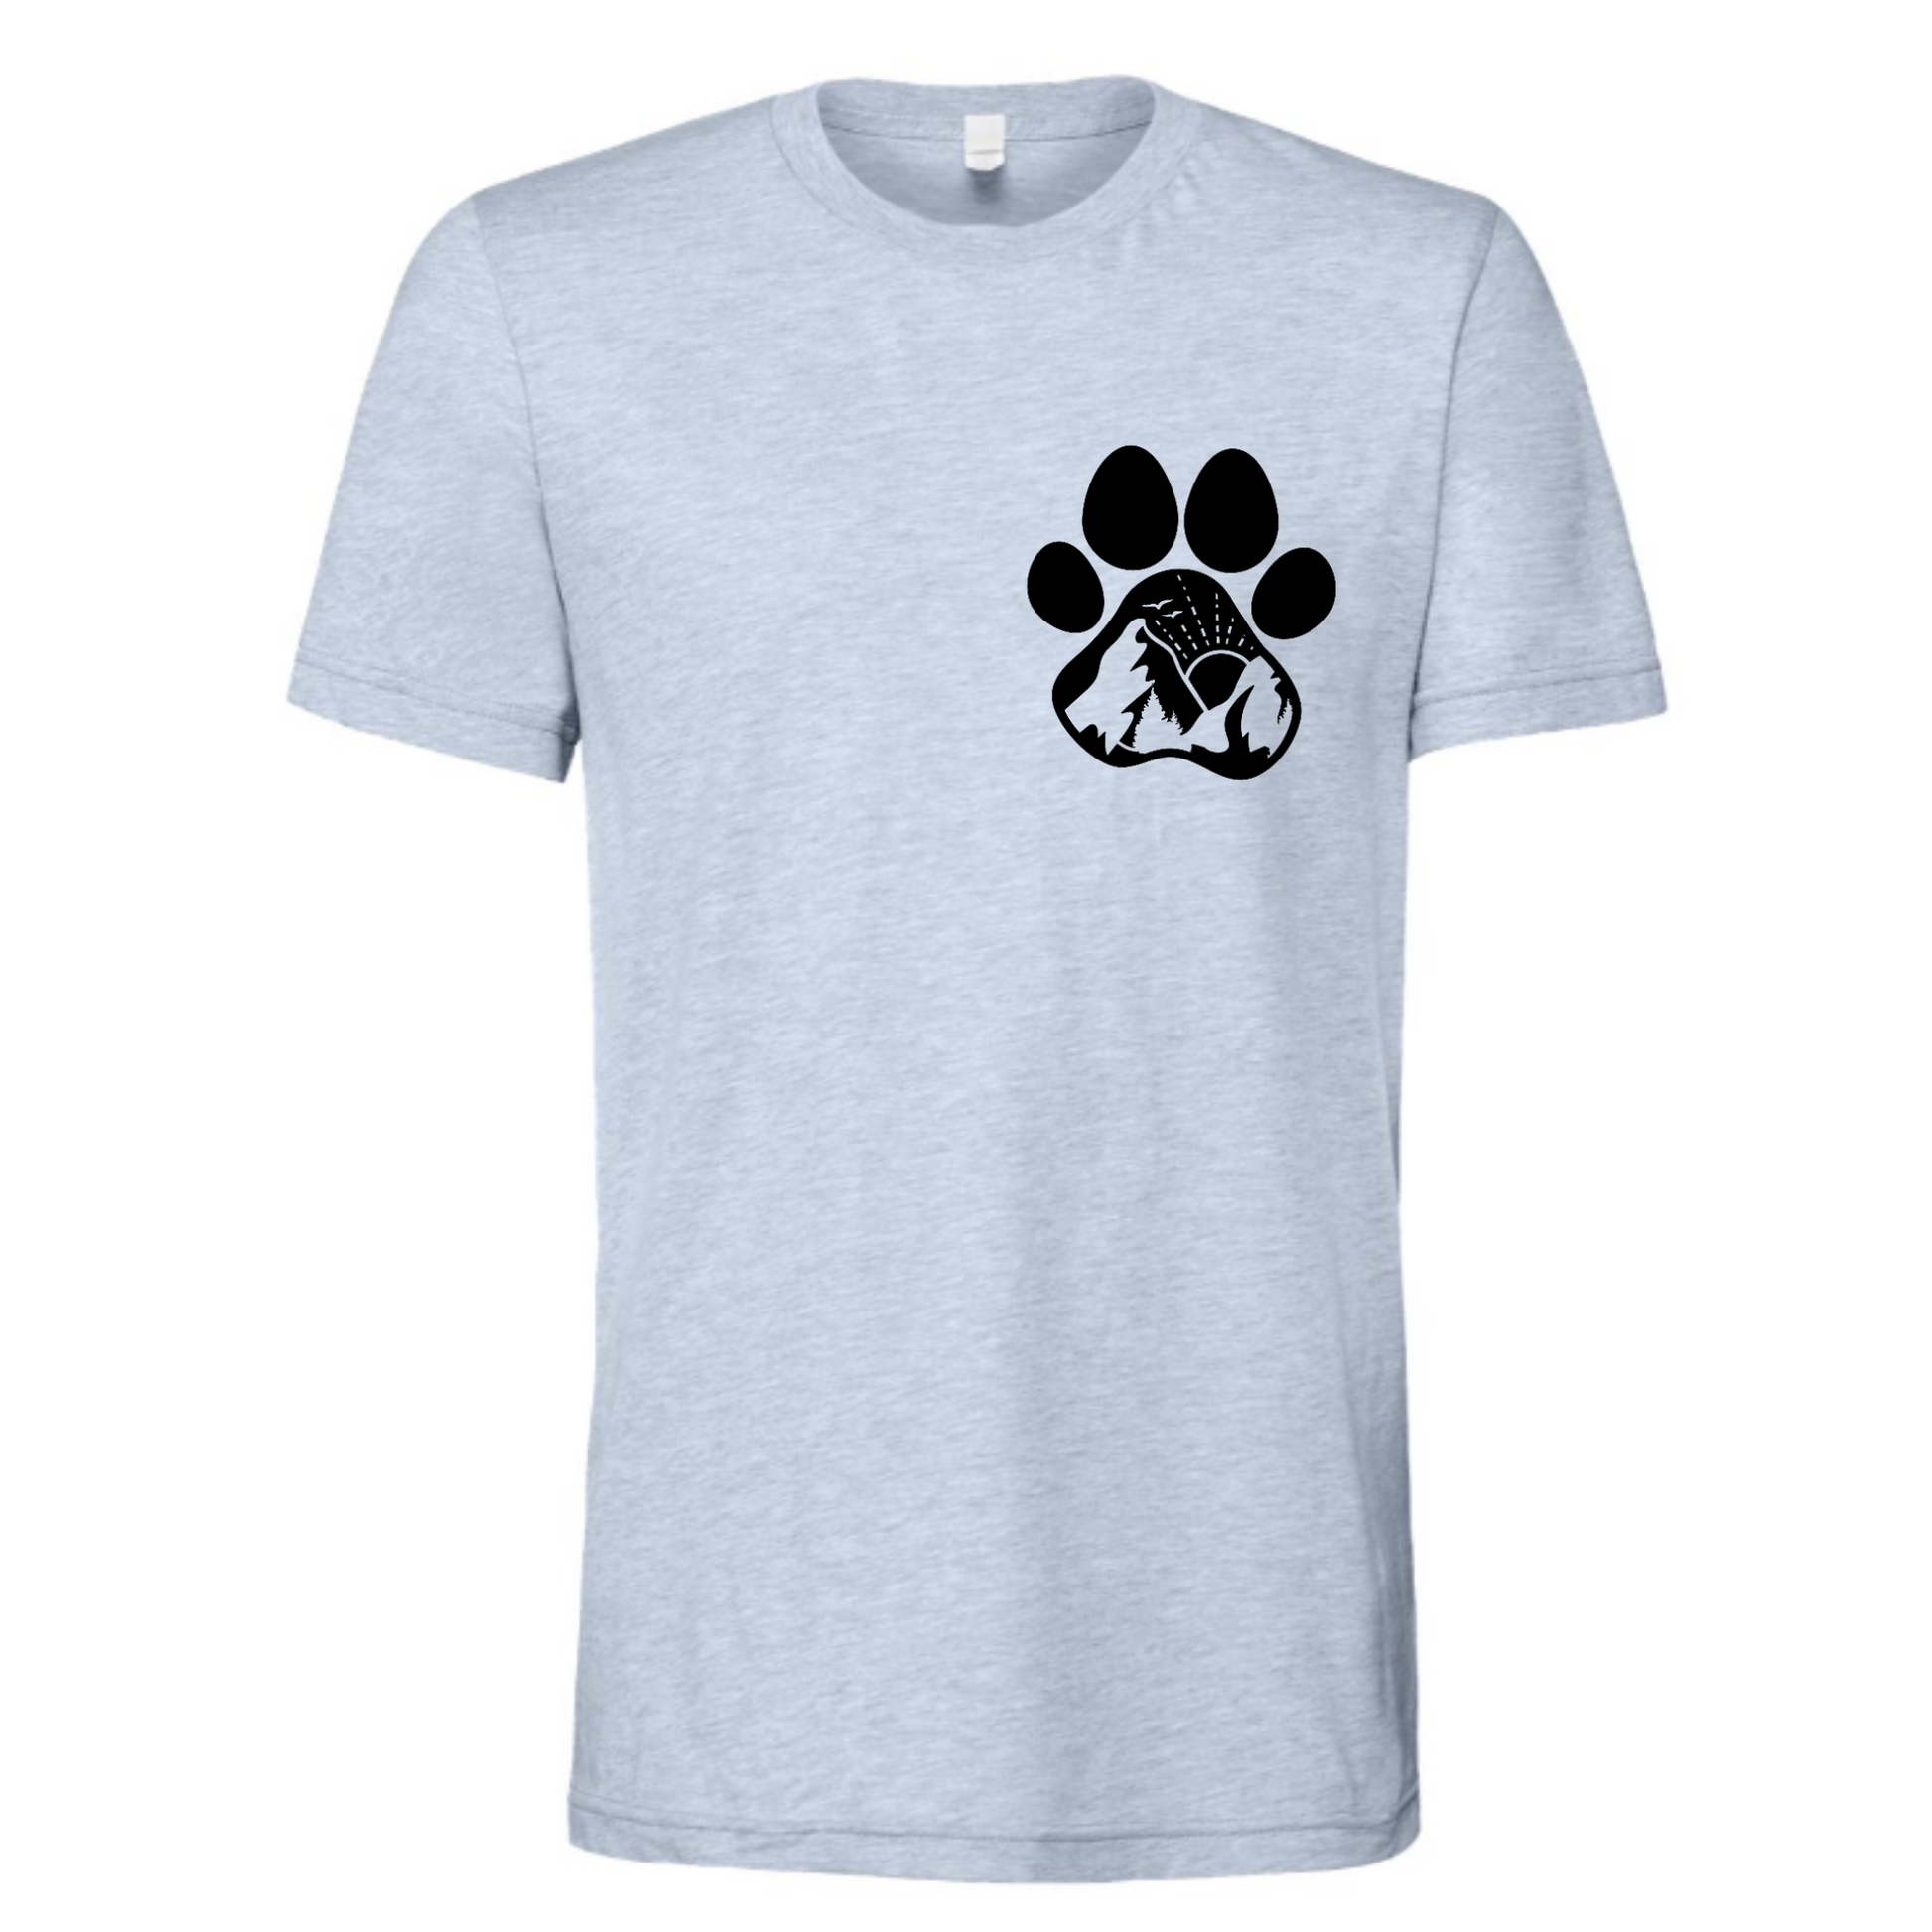 Labrador Mom Shirt - Black design on a dusty blue shirt (Front view) - paw print with the mountains, sun and birds on the corner pocket